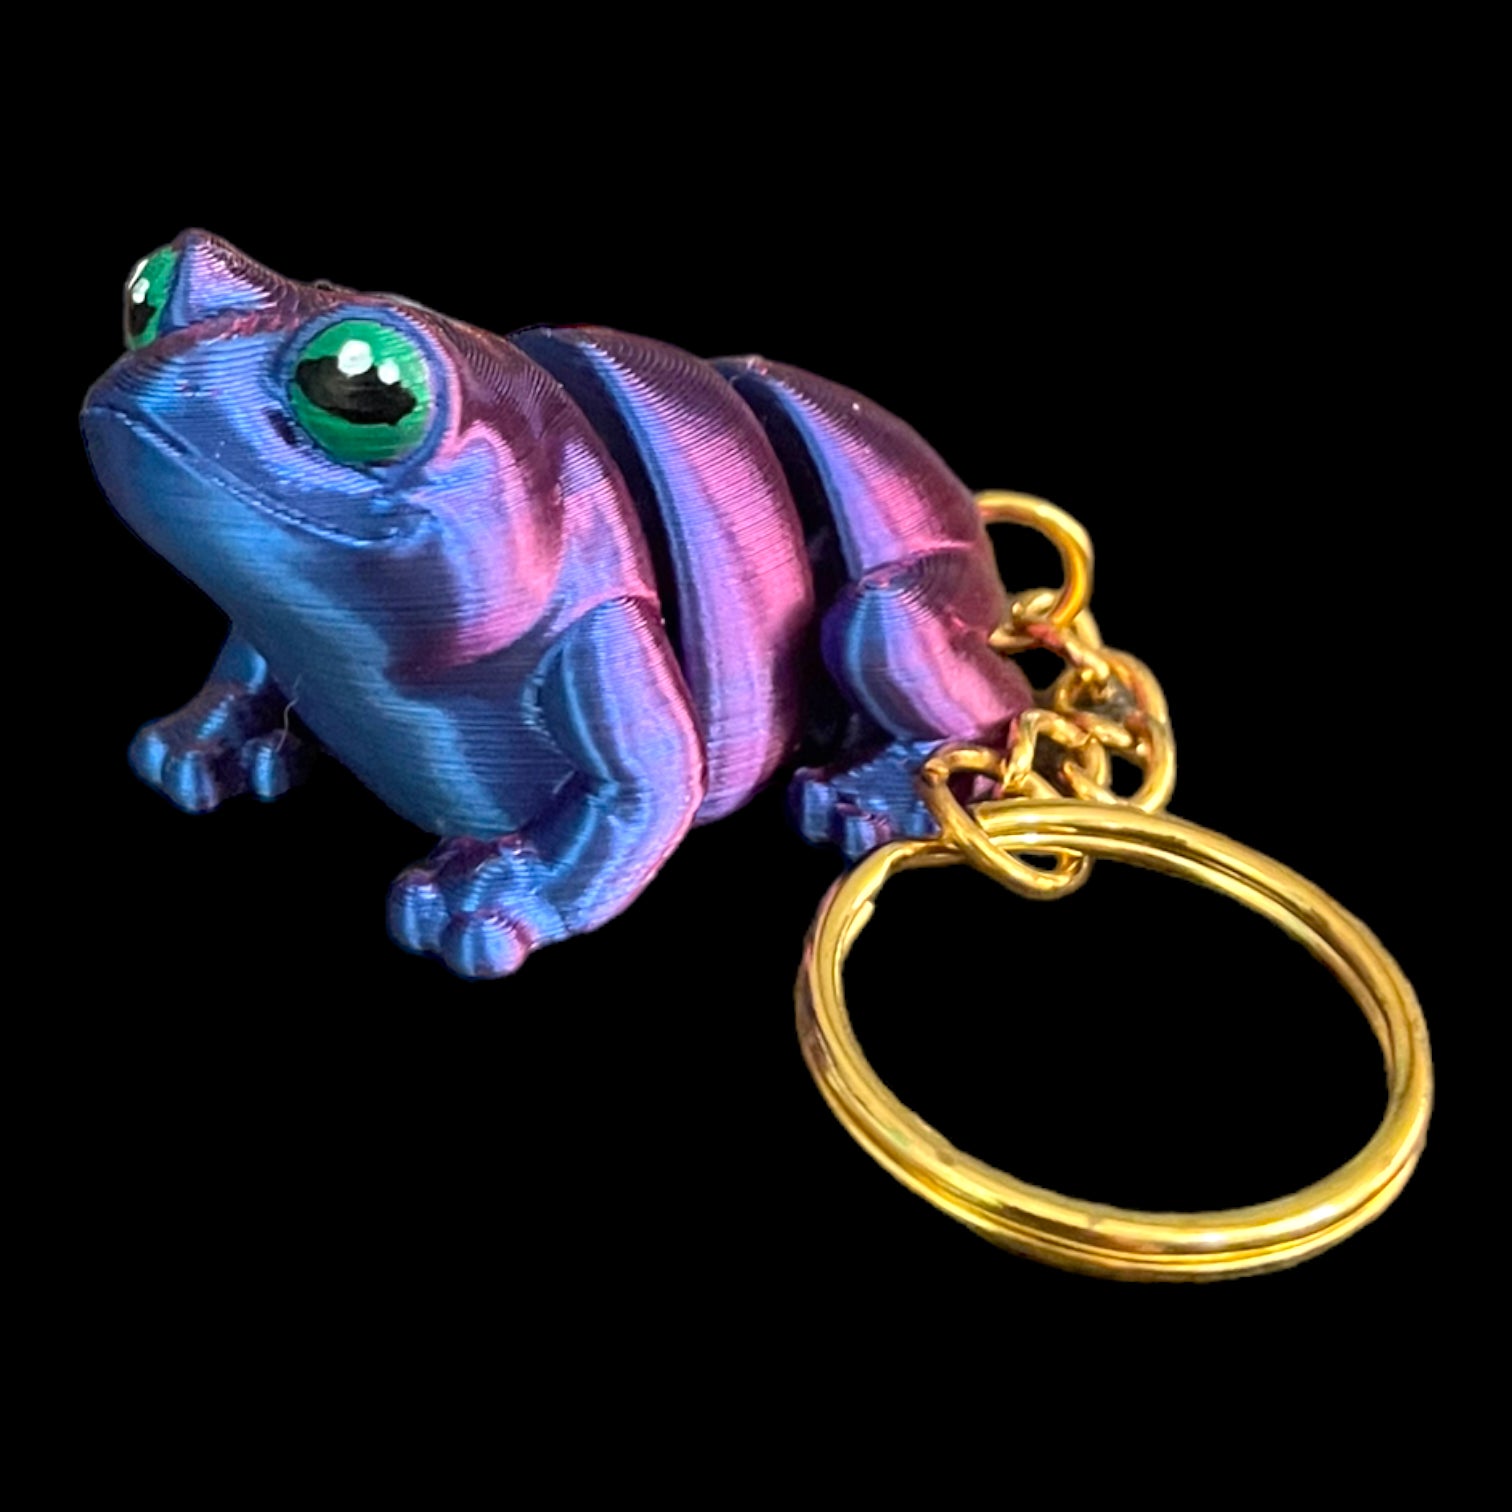 3D Printed Articulated Frog Keychain